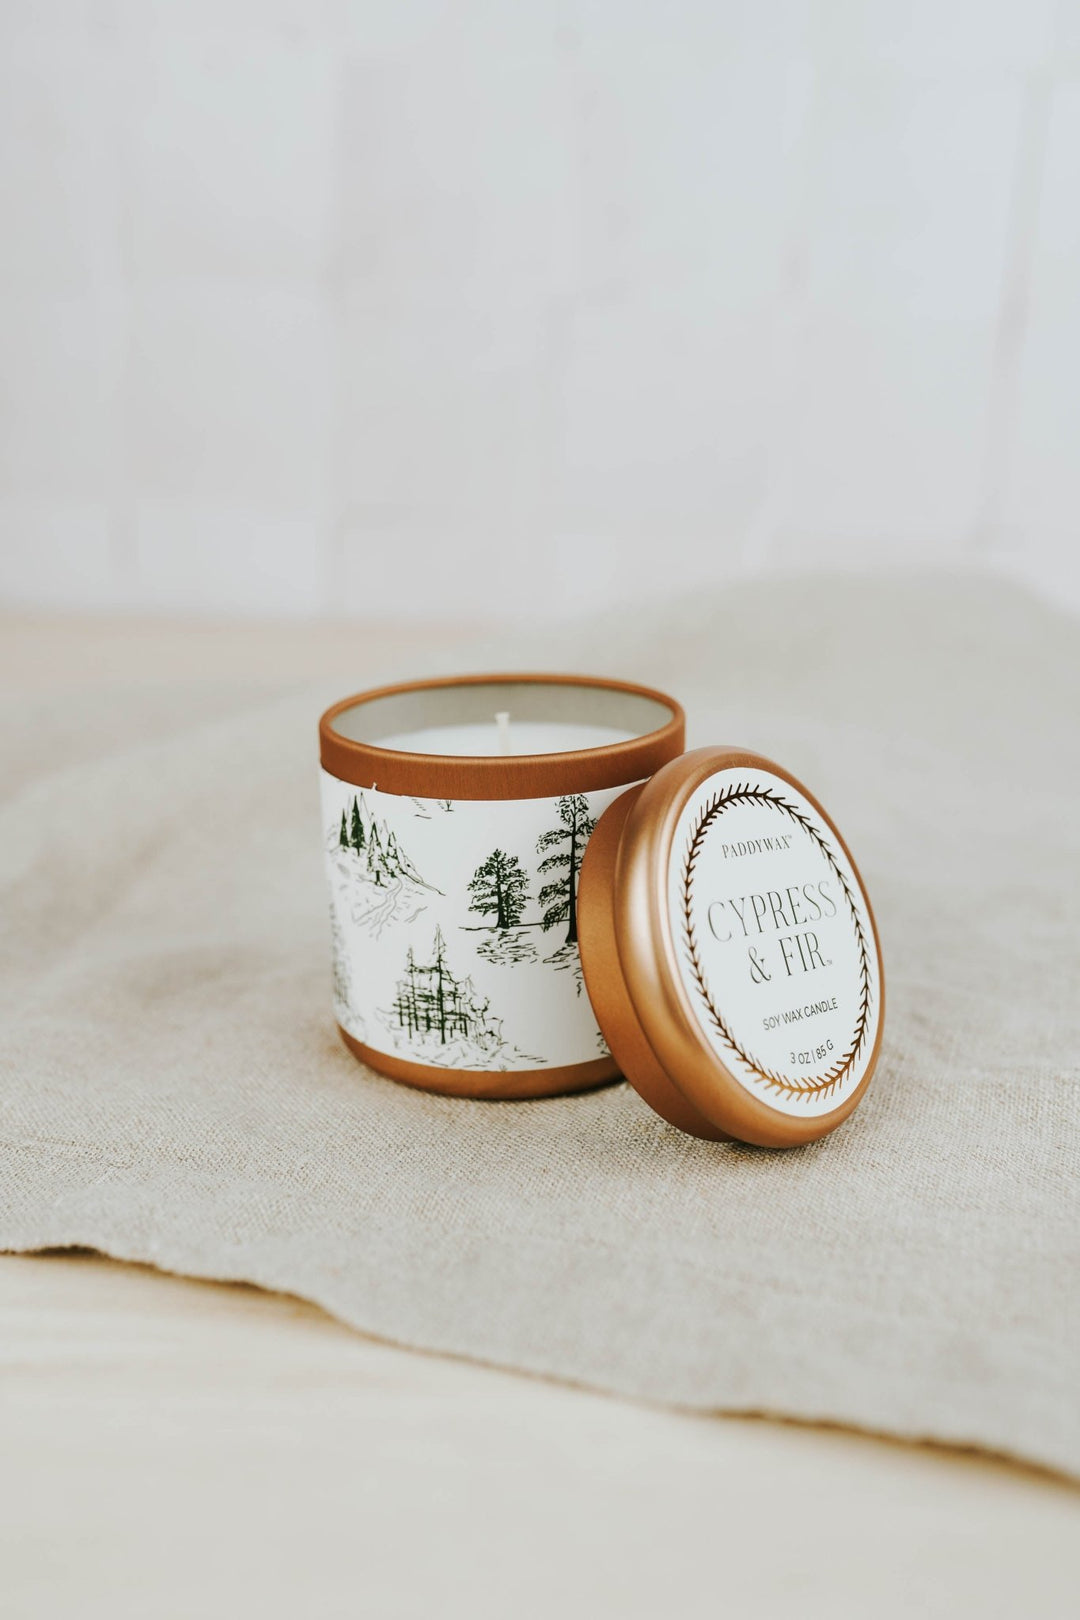 Cypress + Fir White Petite Tin Candle - Heyday